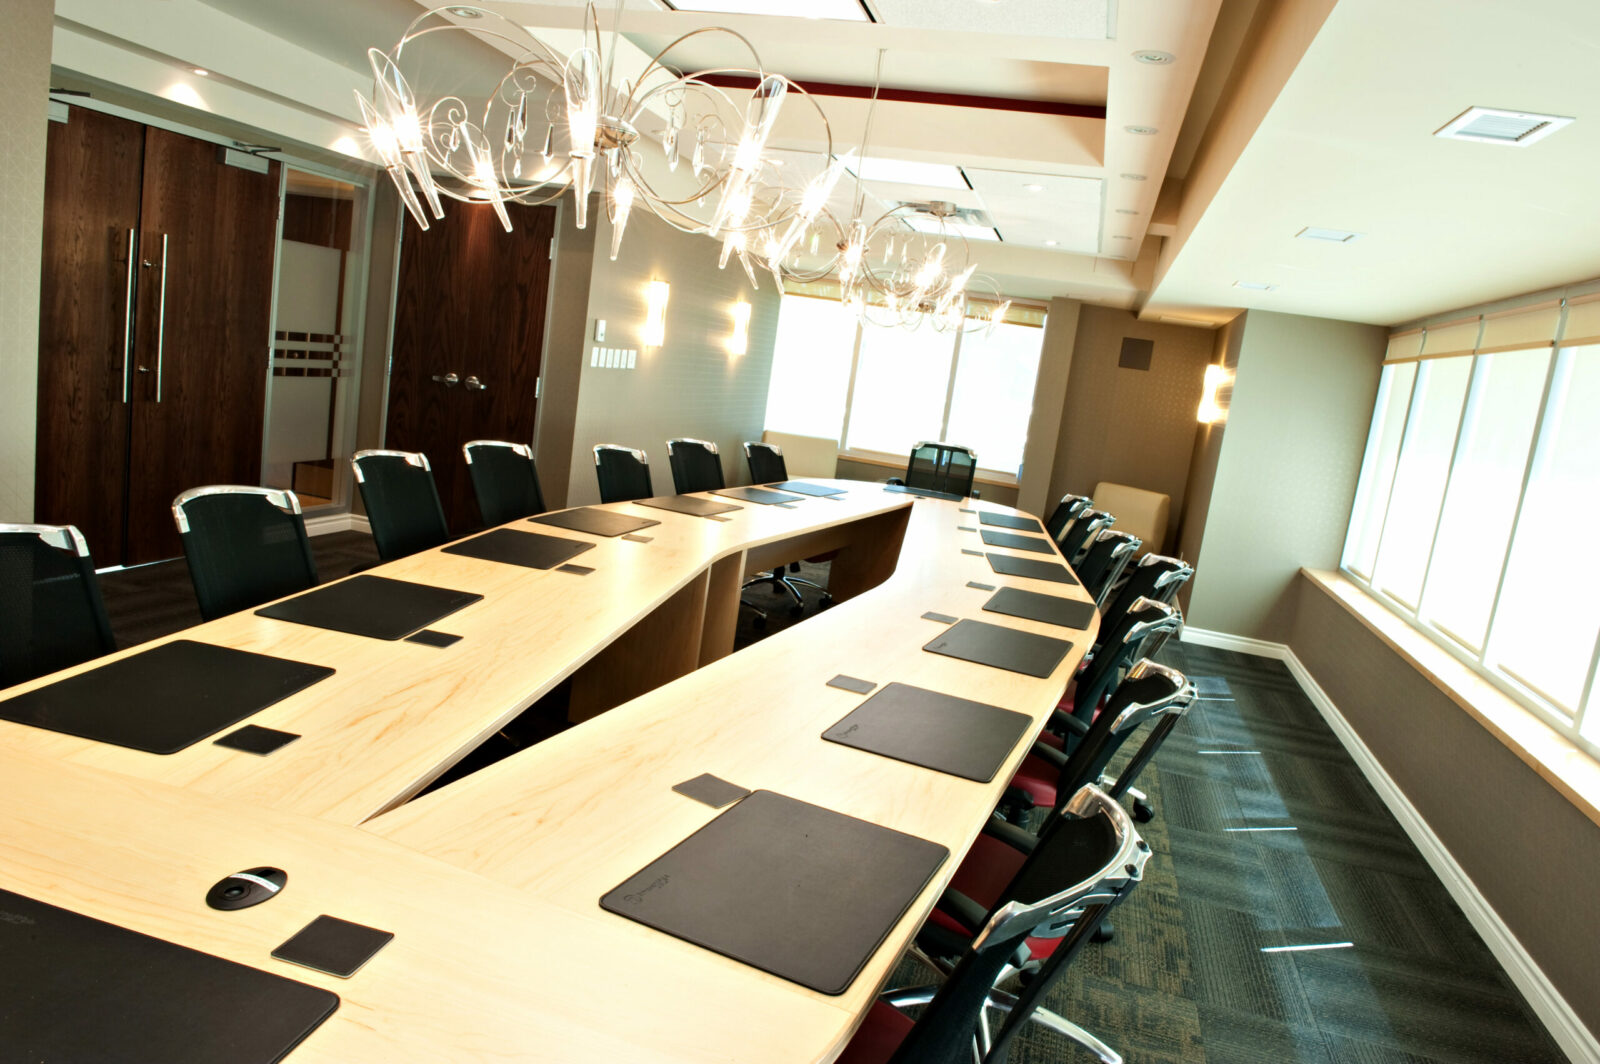 Our Hamilton, Ontario law firm features a contemporary conference room equipped with an elongated table, sophisticated black chairs, and exquisite chandeliers.